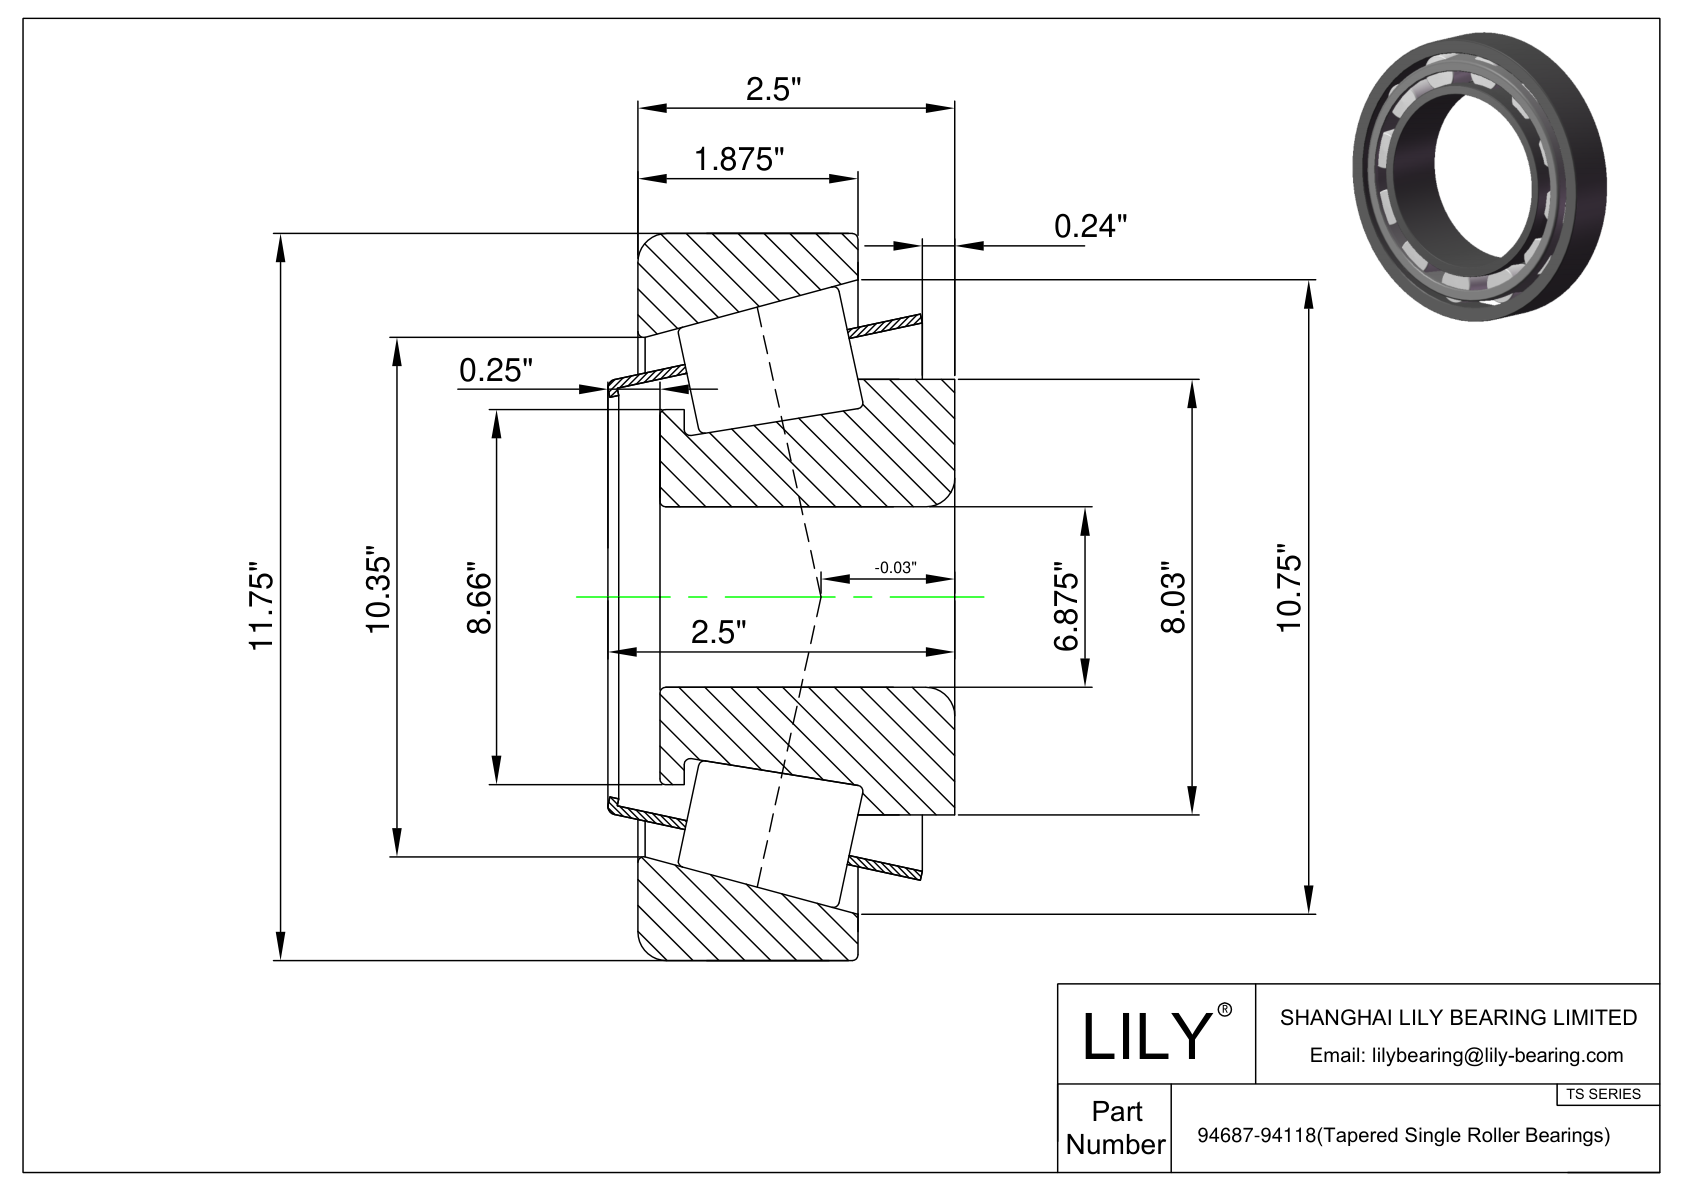 94687-94118 TS (Tapered Single Roller Bearings) (Imperial) cad drawing